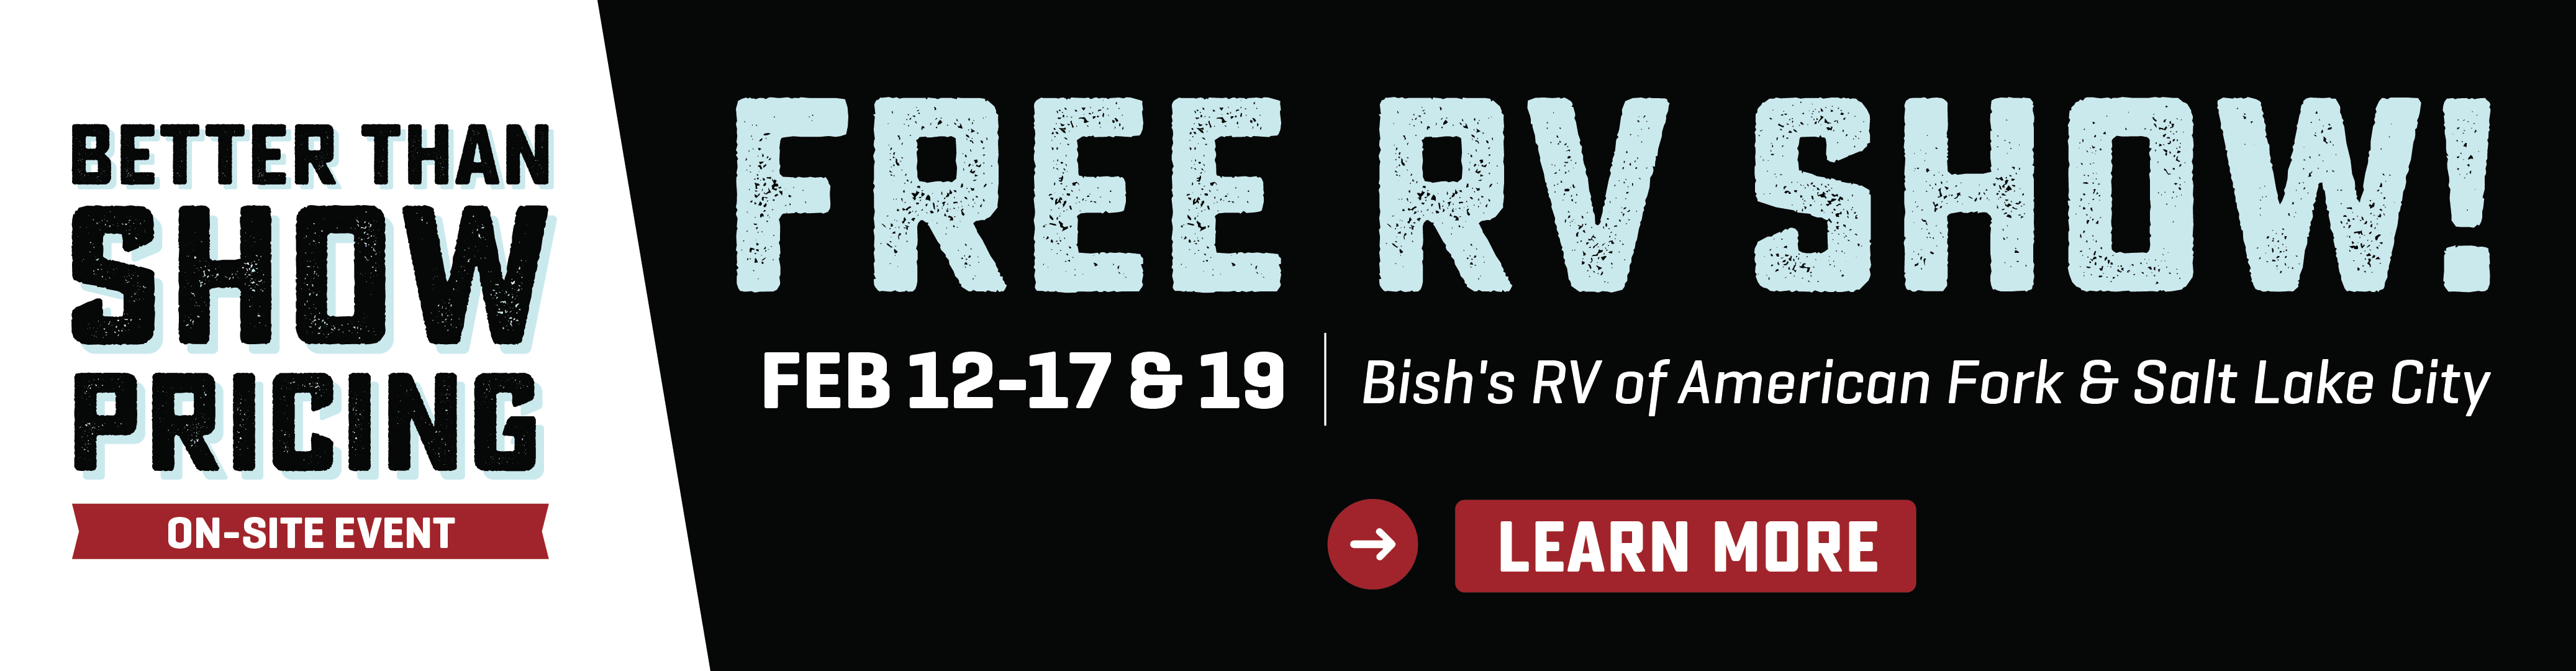 Free RV Show - Better Than Show Pricing On-Site Event - Feb. 12-17 & 19, 2024 - Bish's RV of American Fork & Salt Lake